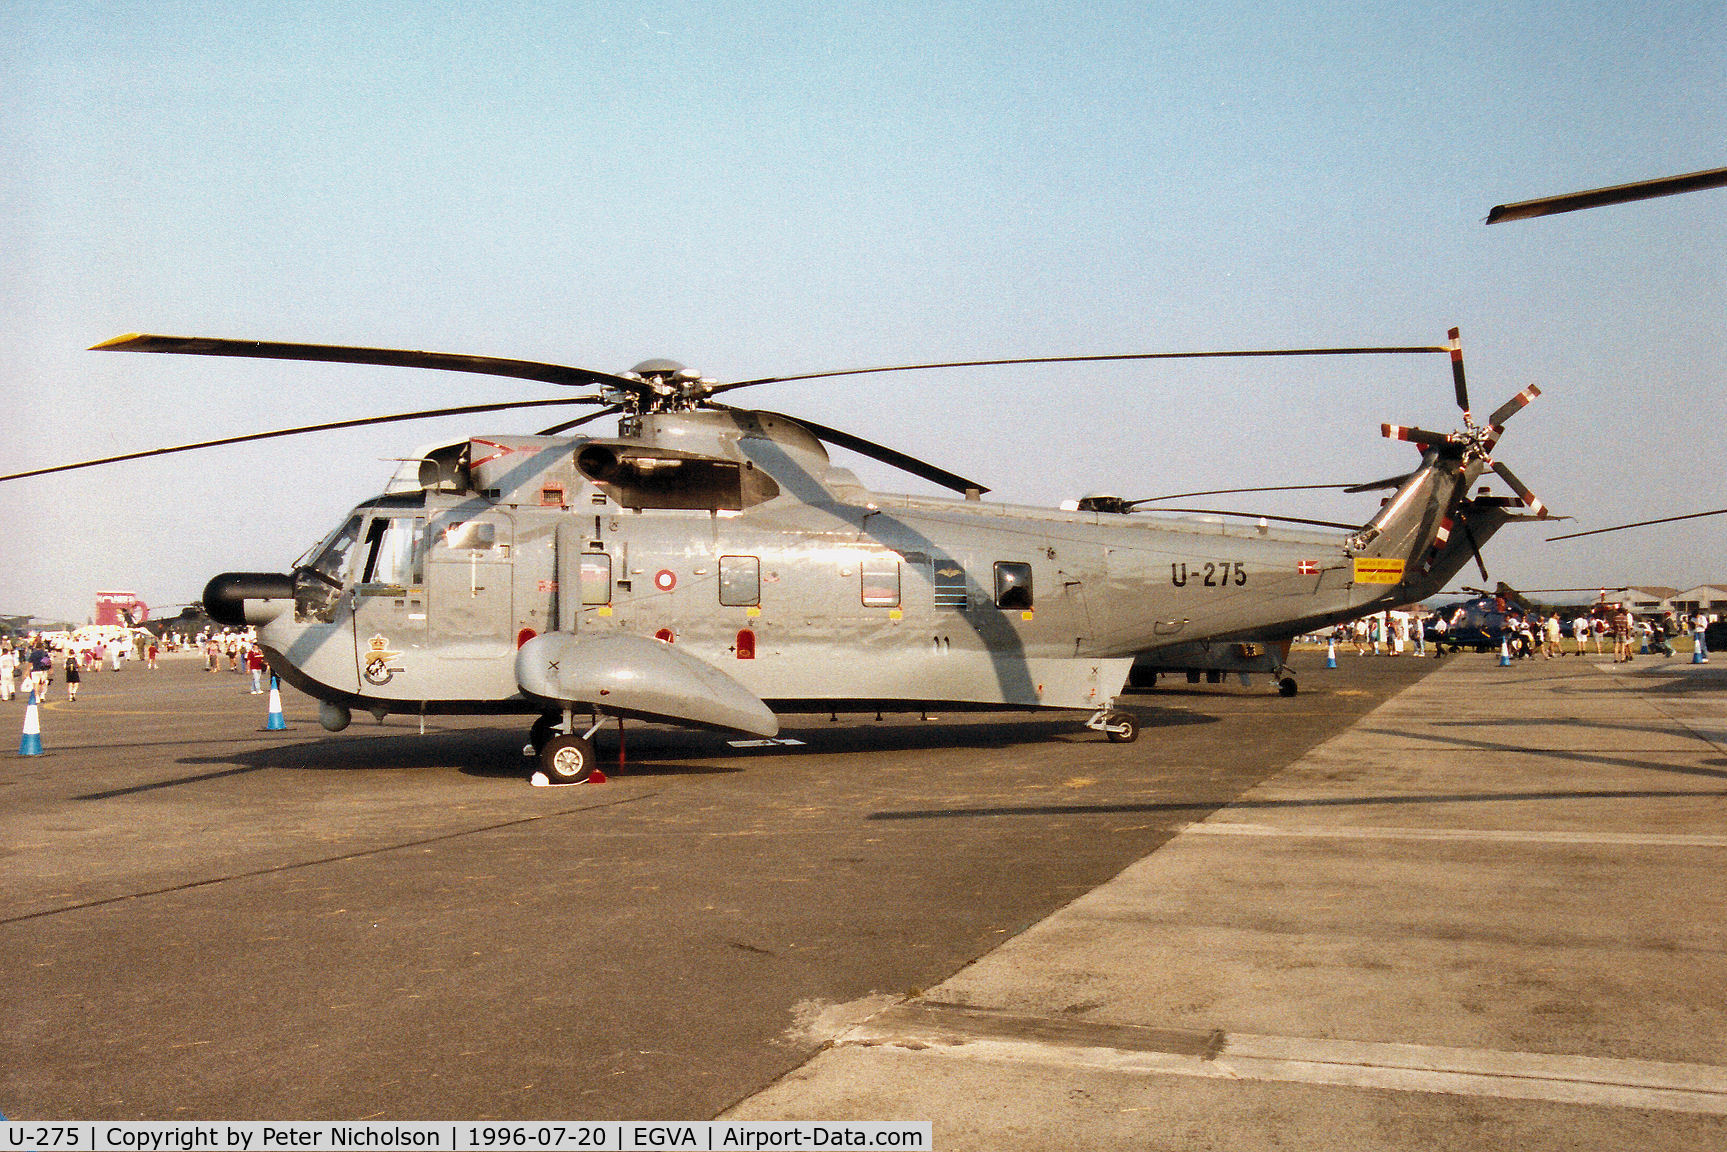 U-275, Sikorsky S-61A C/N 61275, S-16A Sea King of Eskradille 722 Royal Dansh Air Force based at Vaerlose on display at the 1996 Royal Intnl Air Tattoo at RAF Fairford.